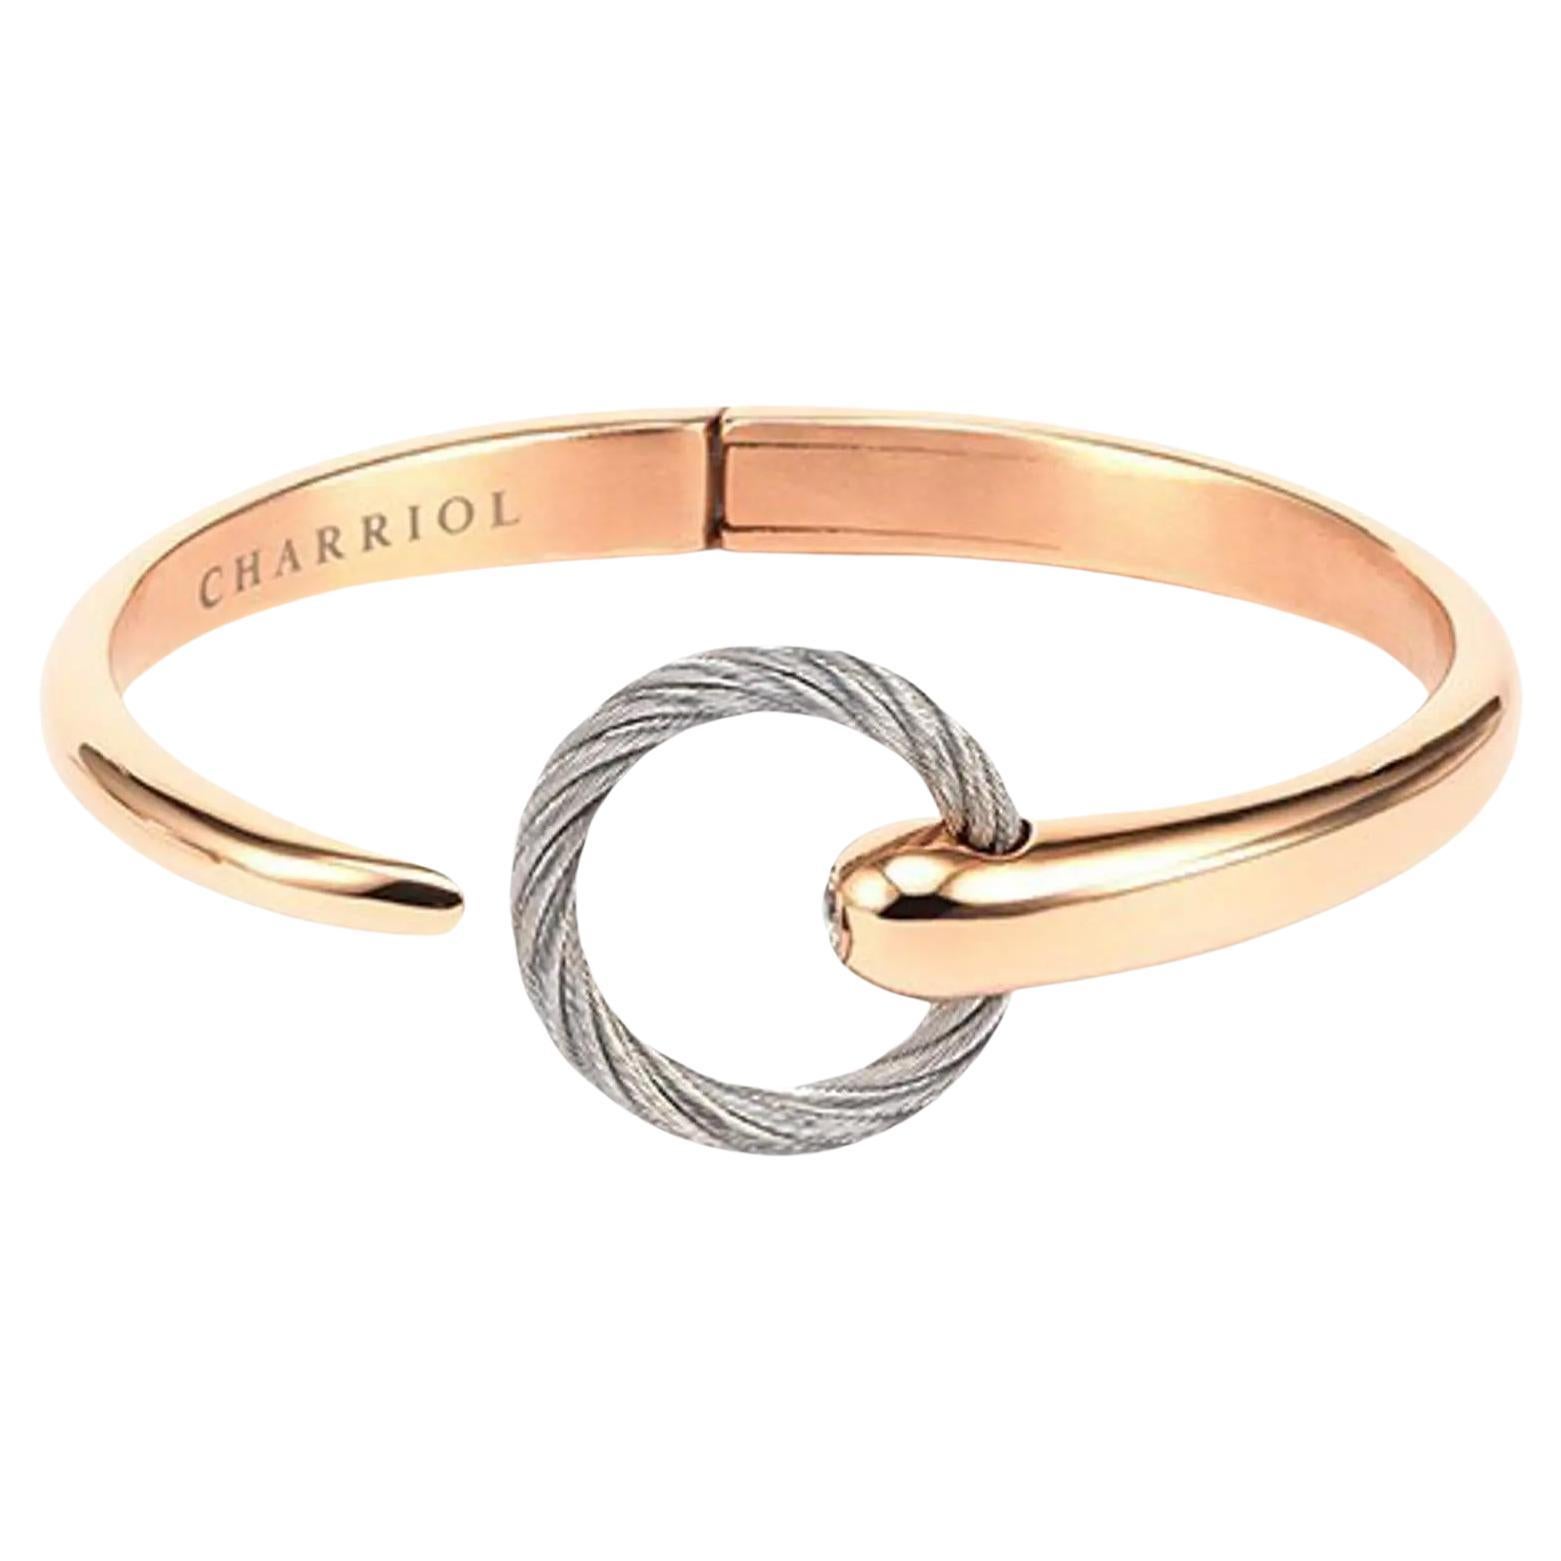 Charriol Infinity Zen Rose Gold PVD Steel Cable Bangle 04-102-1232-0 Taille M en vente